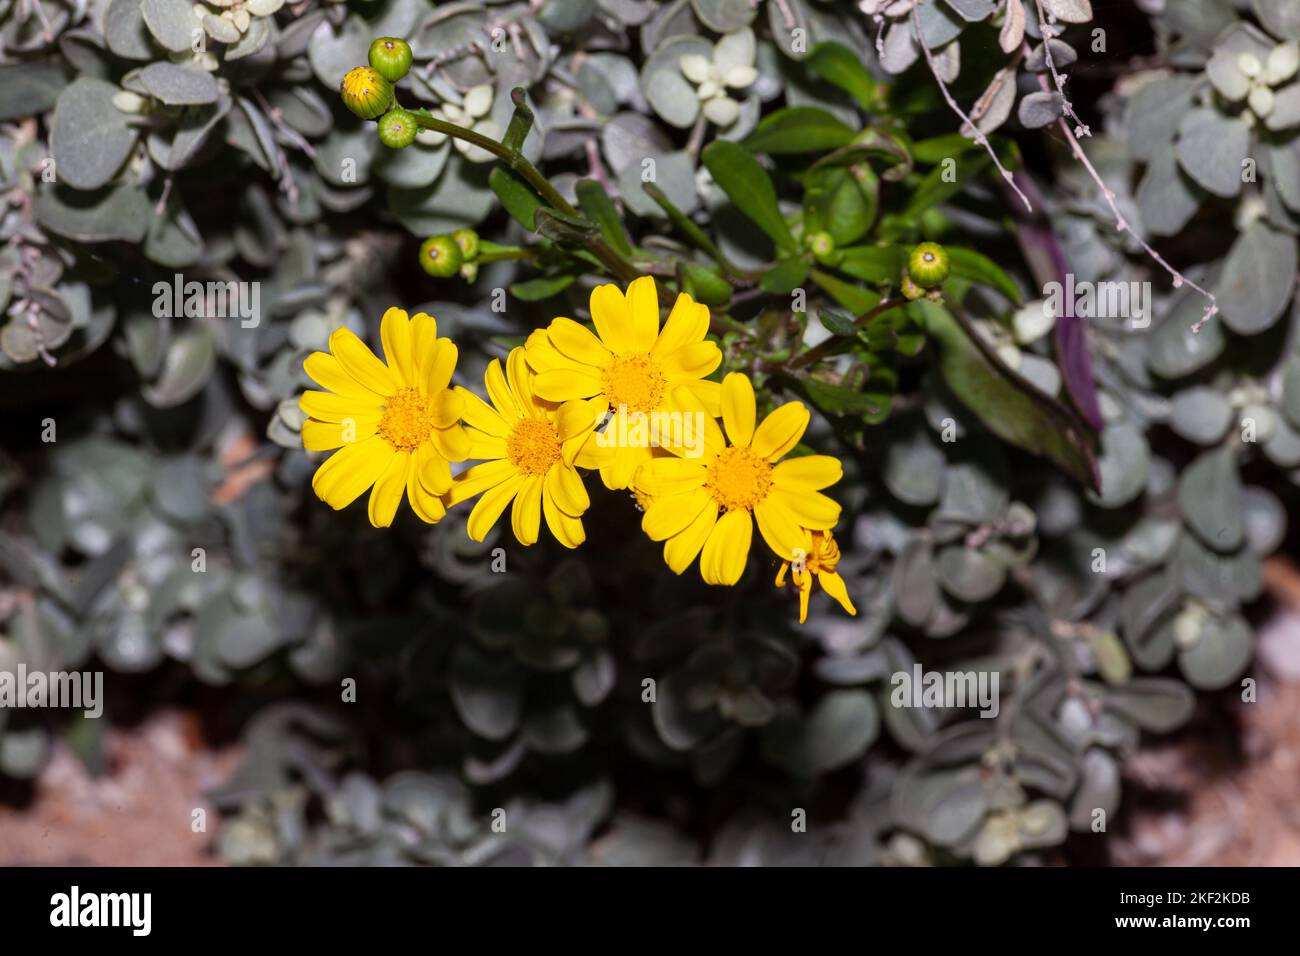 A cheerful daisy flower found in both gardens and in the wild Stock Photo